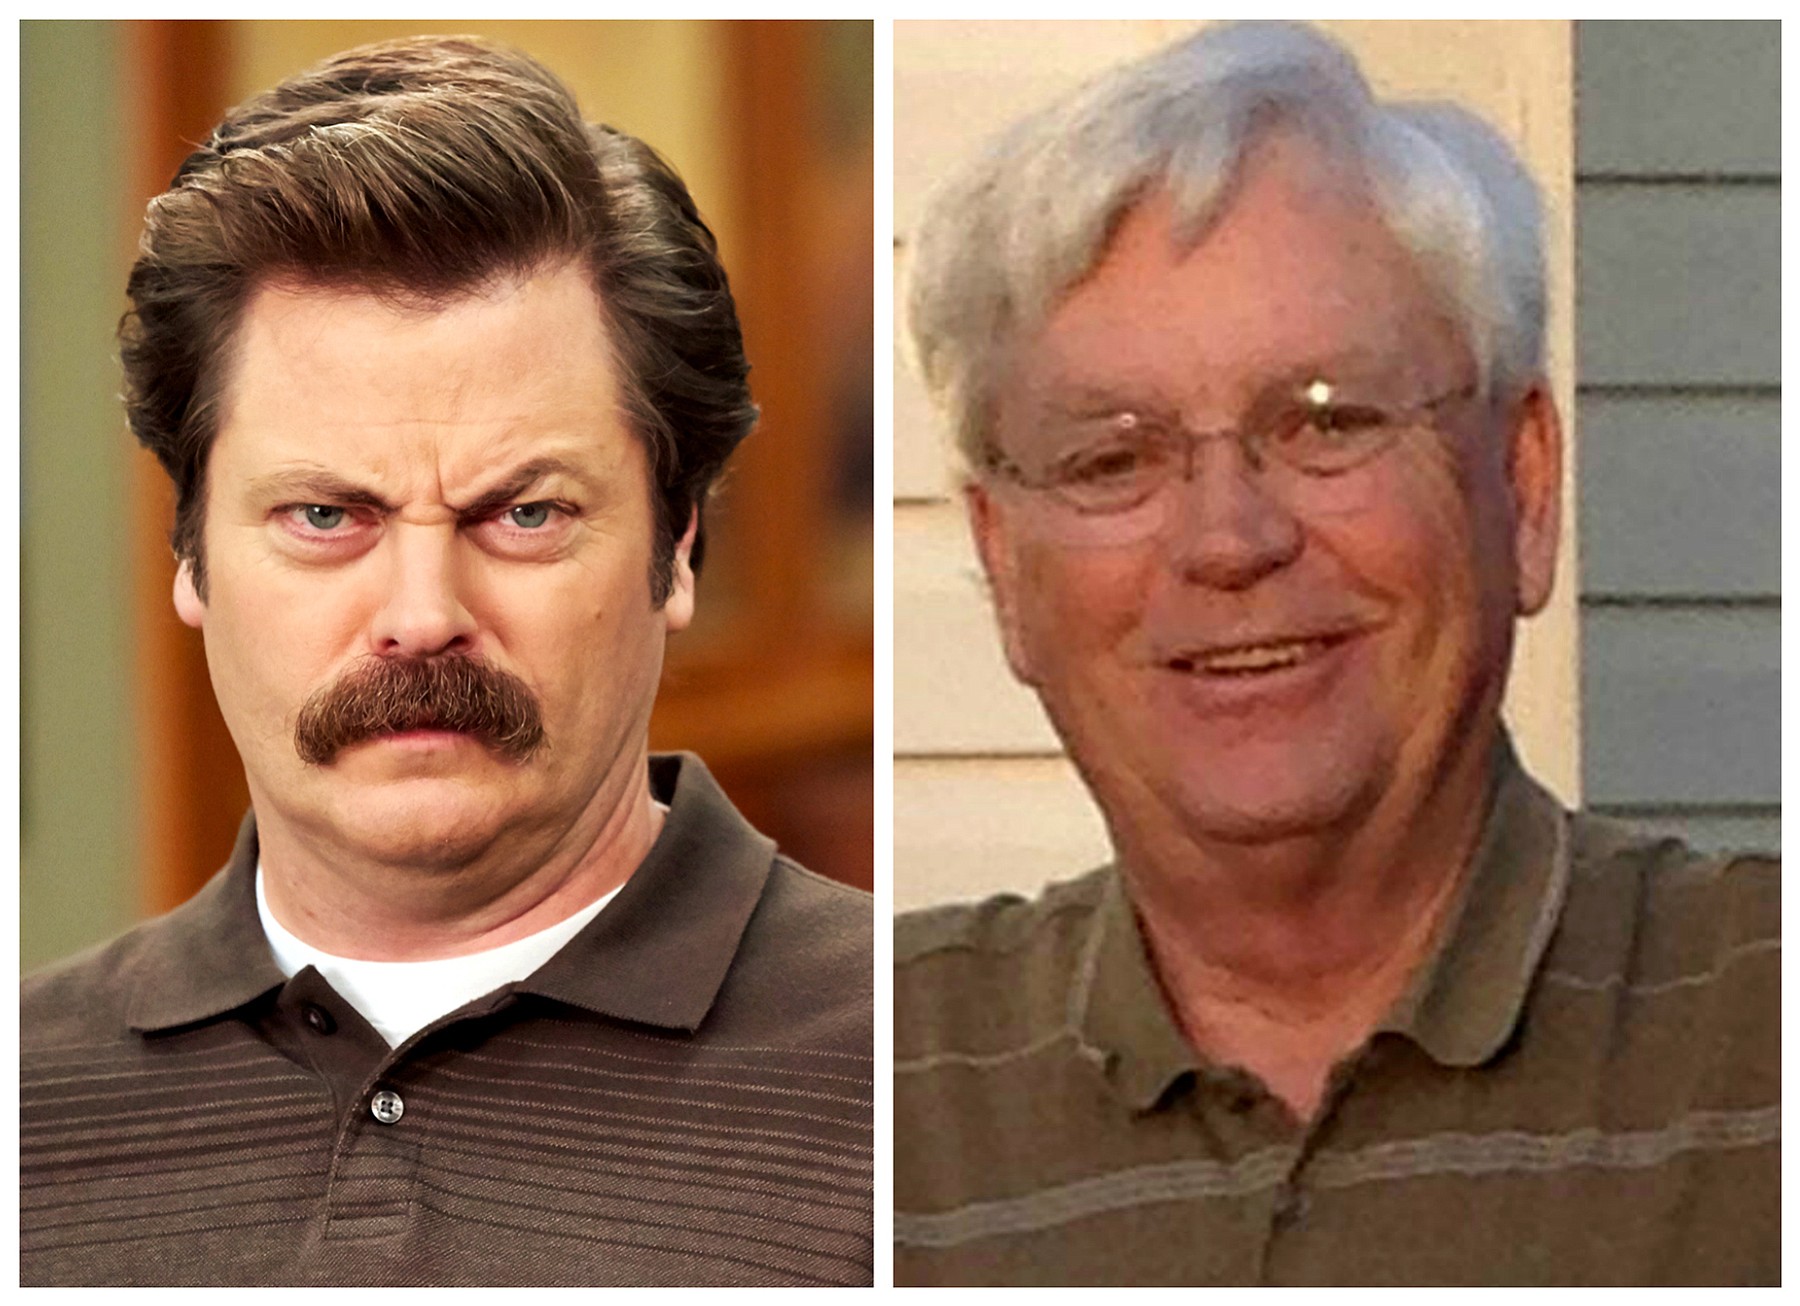 NBC (left); Mindy Swanson
Ron Swanson of &quot;Parks and Recreation,&quot; meet Ron Swanson of Noblesville, Ind.